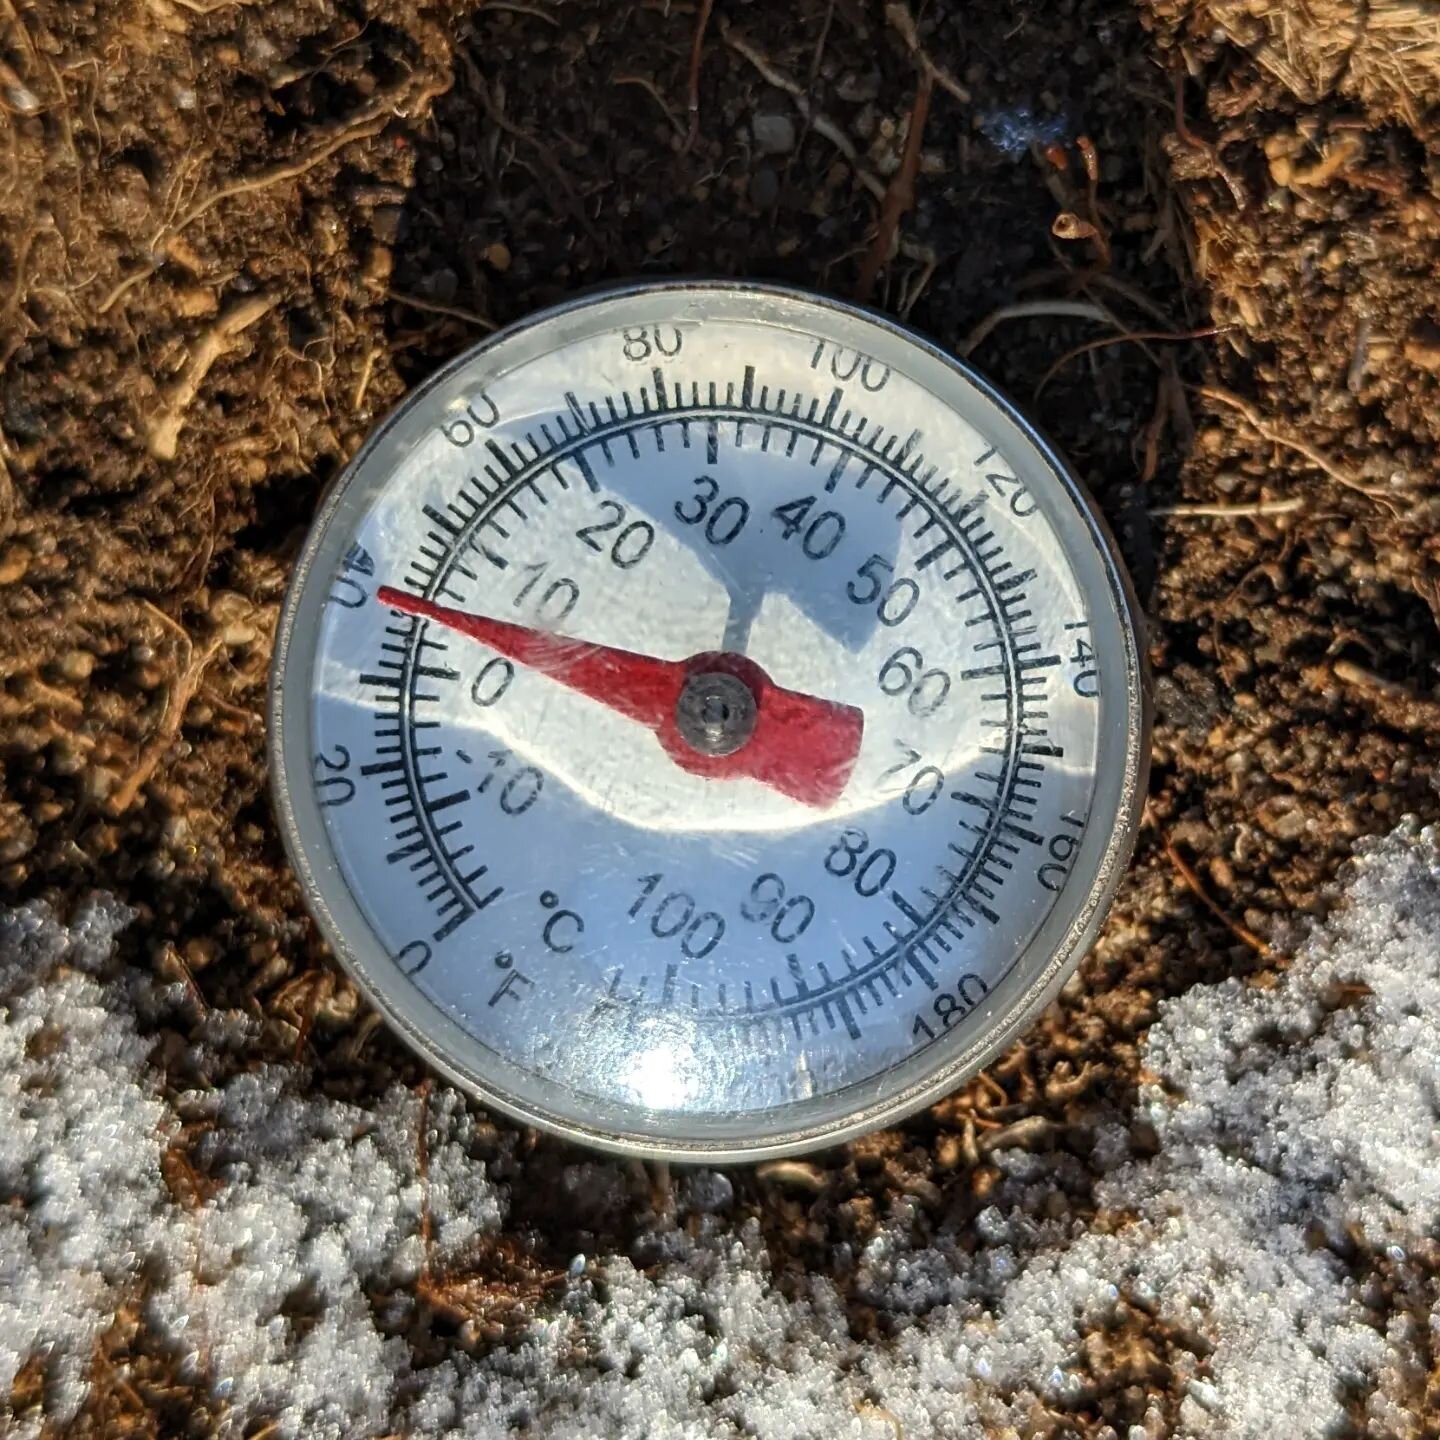 Irrigation winterization: The soil is still holding heat from the summer (40⁰F this morning), don't fret if your blowout hasn't happened yet, turn your controller 'OFF' and be patient, they will get to you. Please don't double book and waste the cont